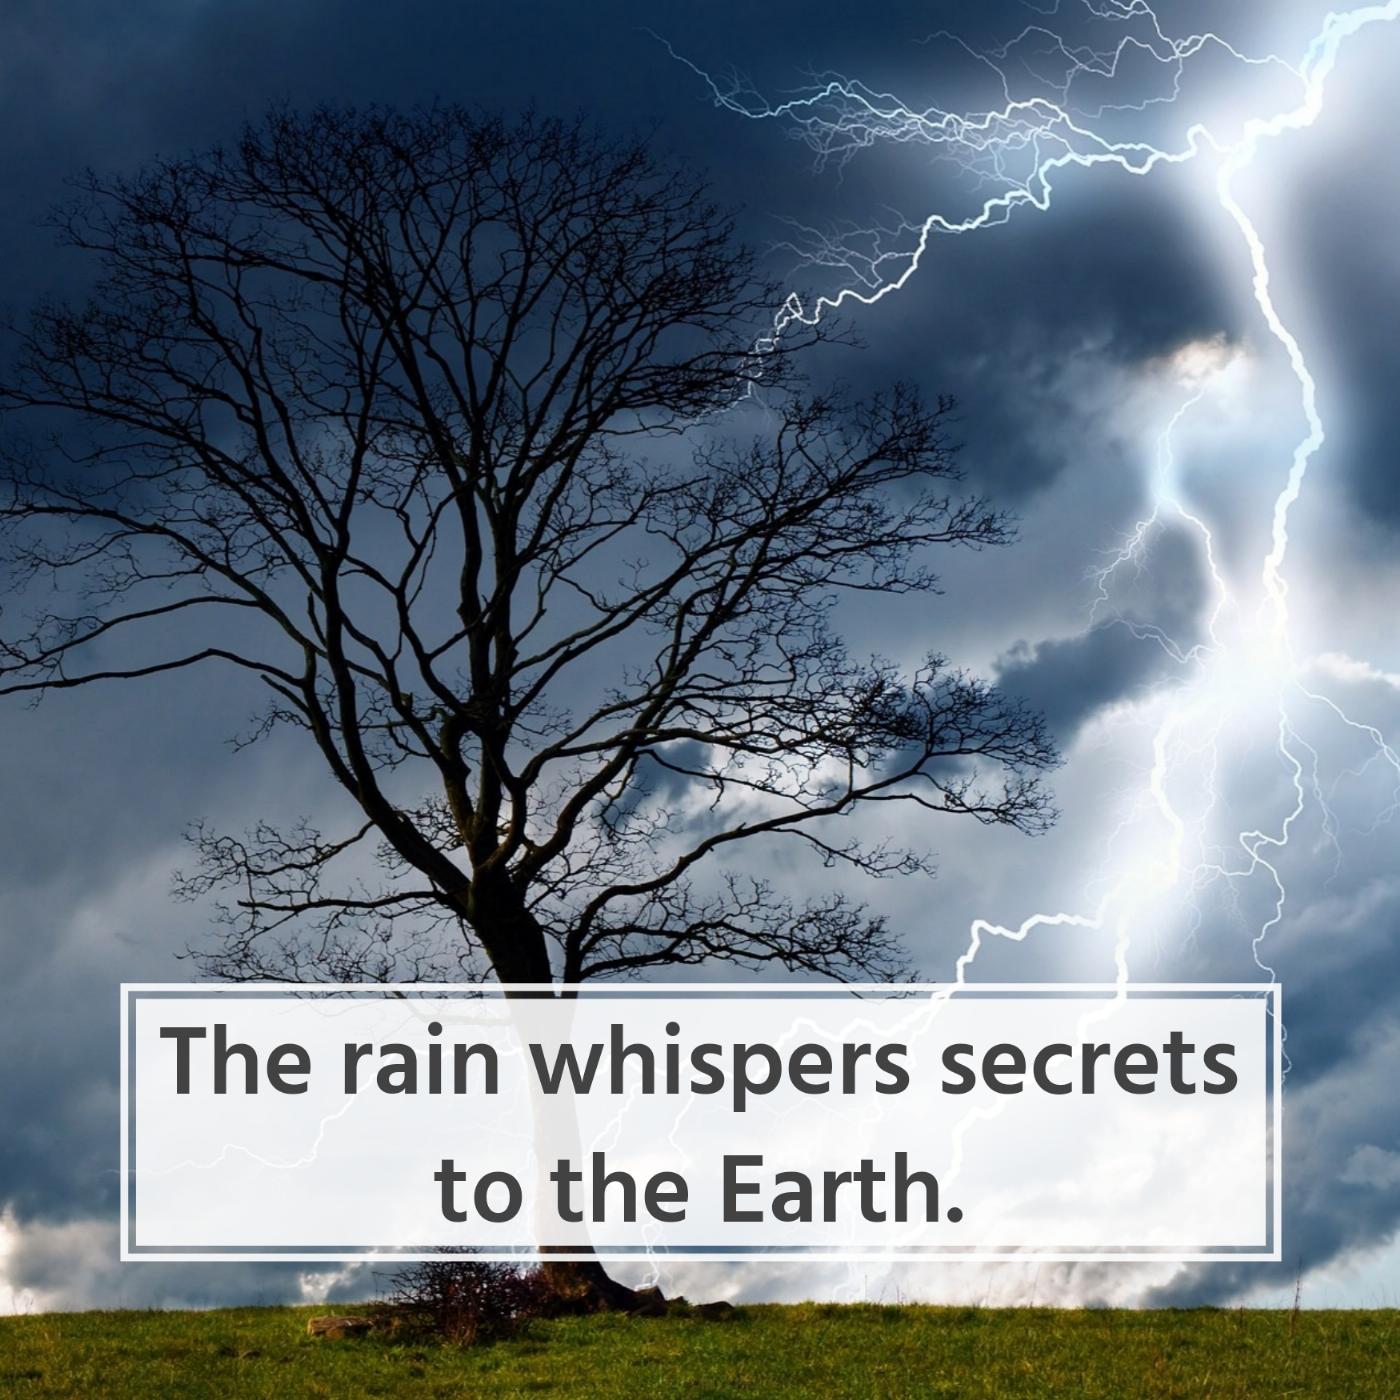 The rain whispers secrets to the Earth